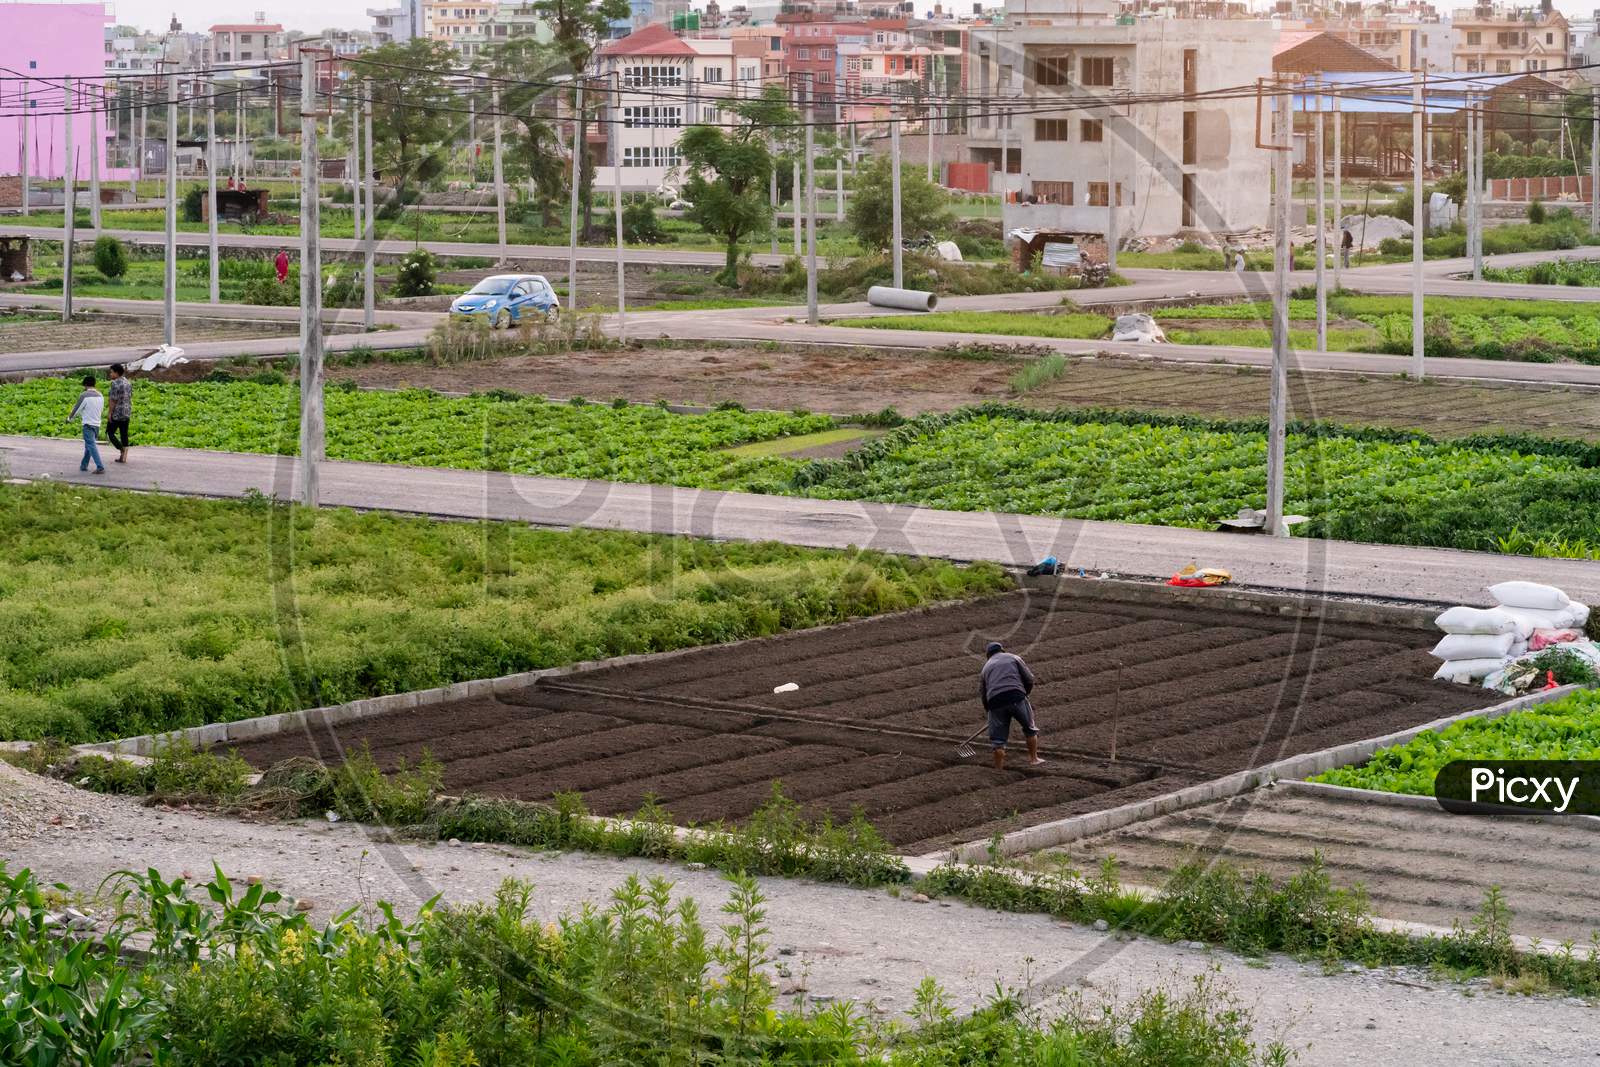 Kathmandu, Nepal - June 2020: A farmer working on a small piece of land plotted for housing to grow vegetables for home and selling in the market.